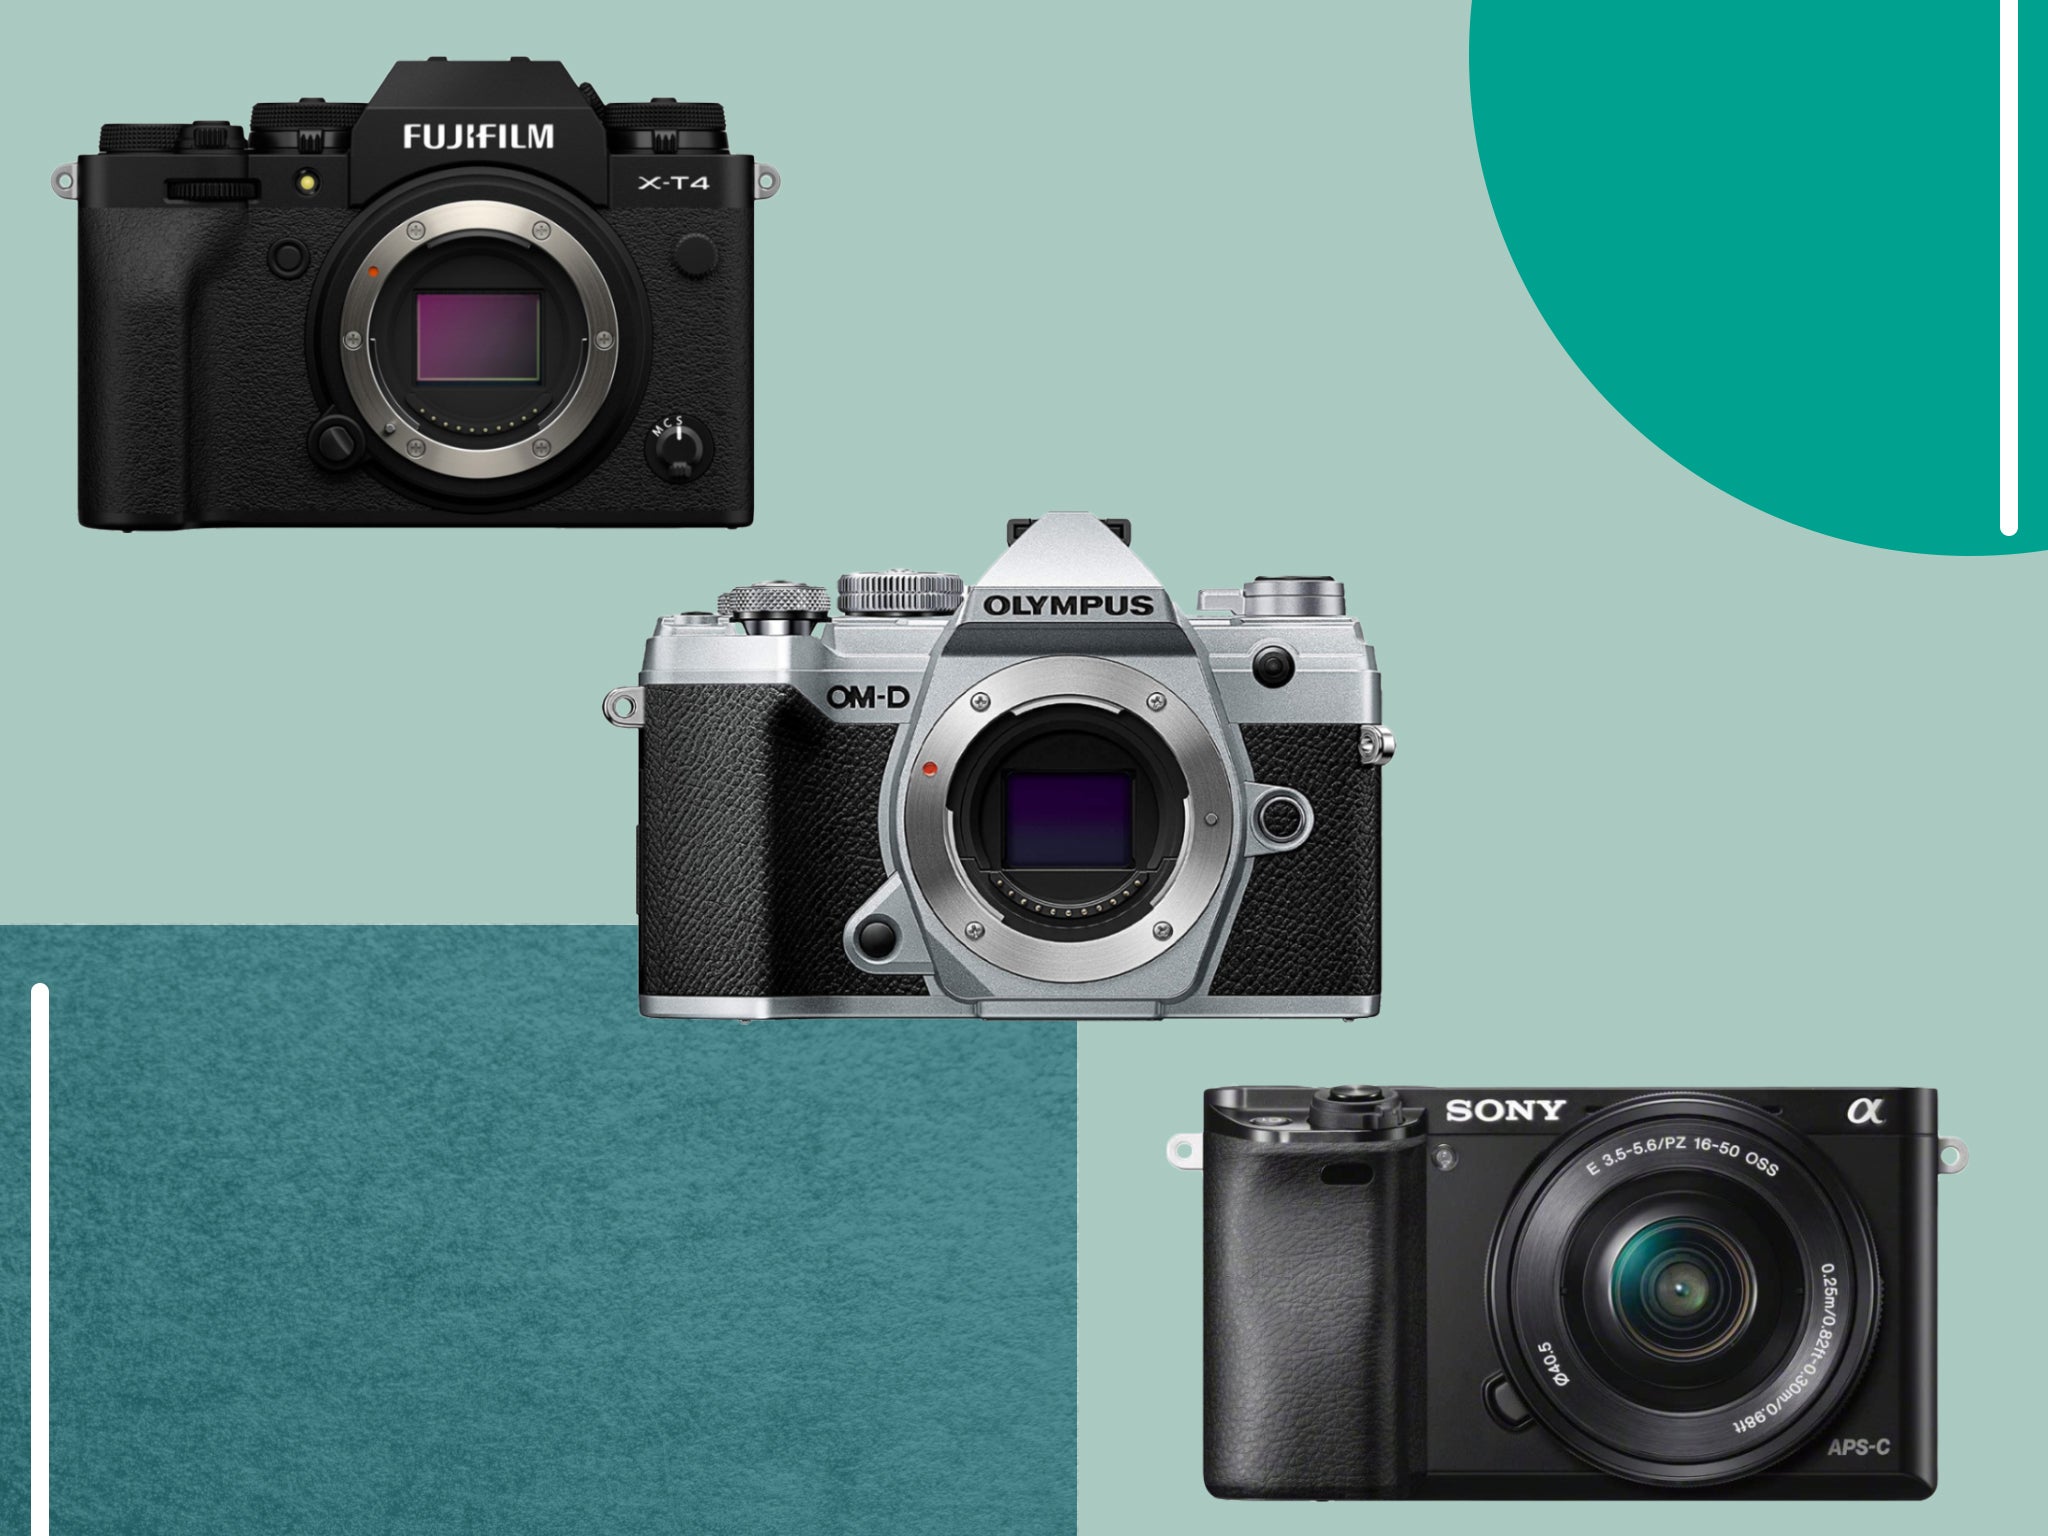 Many top brands such as Canon, Nikon and Sony have made big claims about the mirrorless camera world’s future